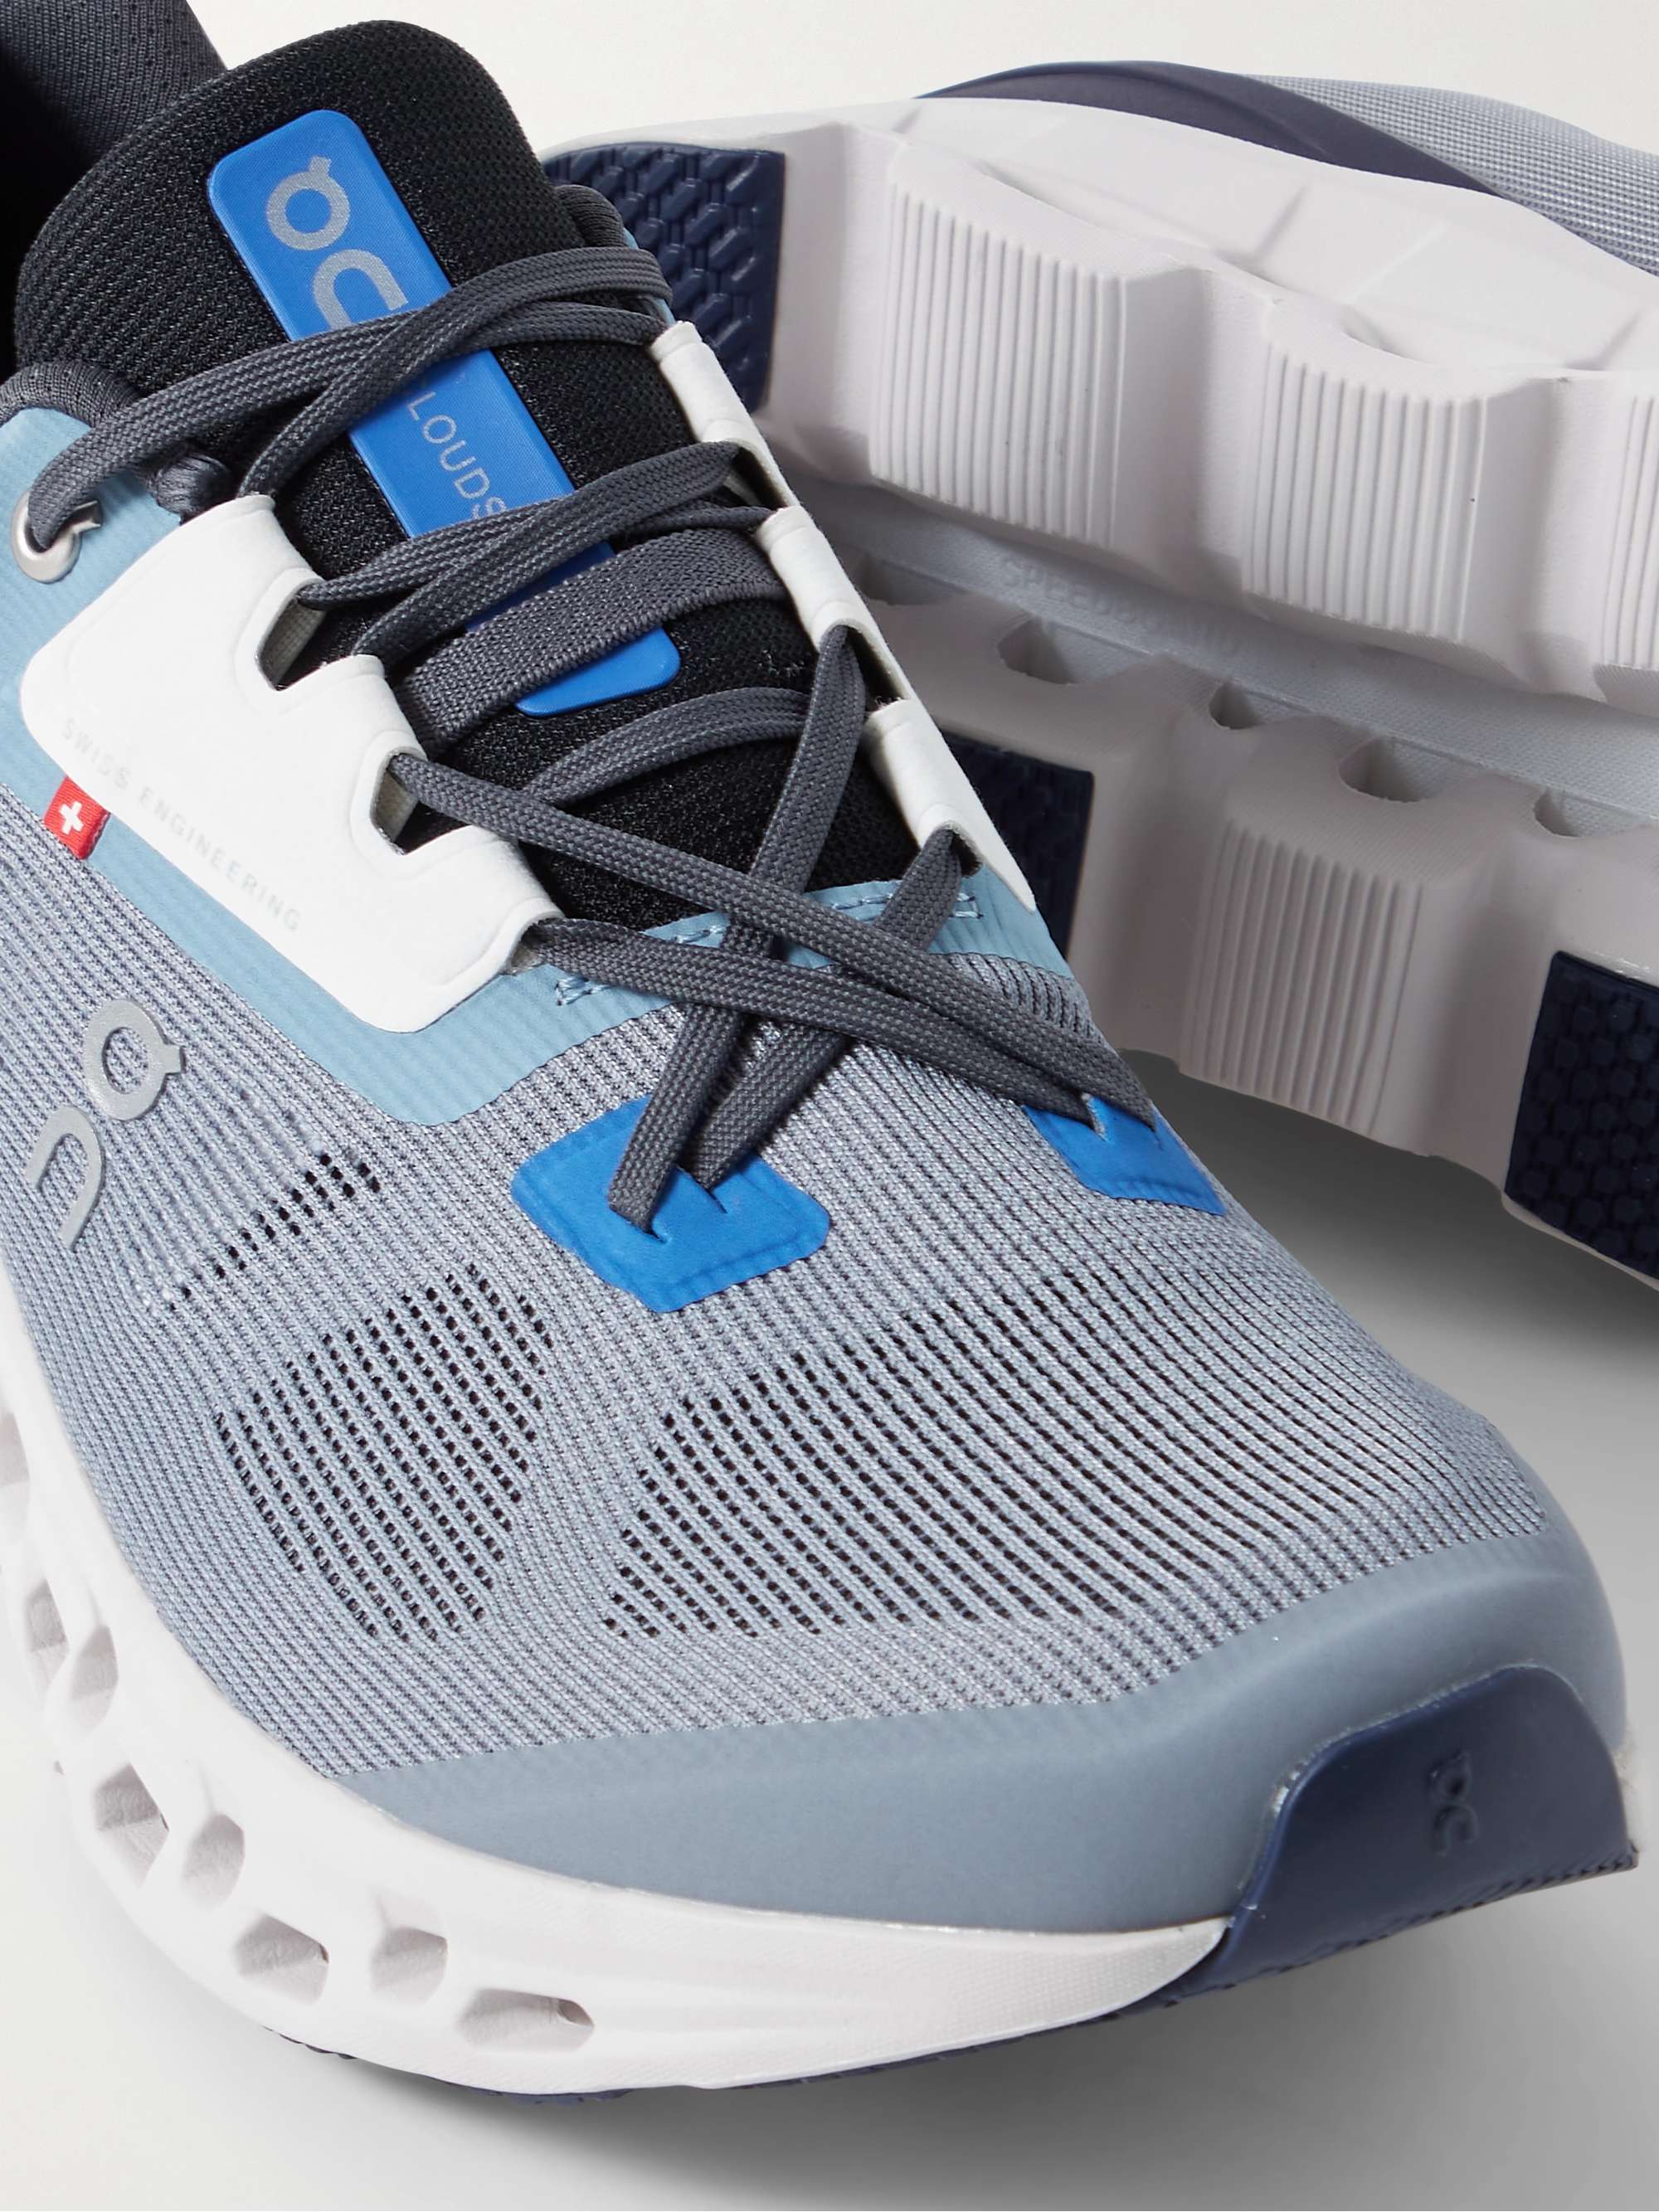 ON Cloudstratus Rubber-Trimmed Recycled Mesh Running Sneakers